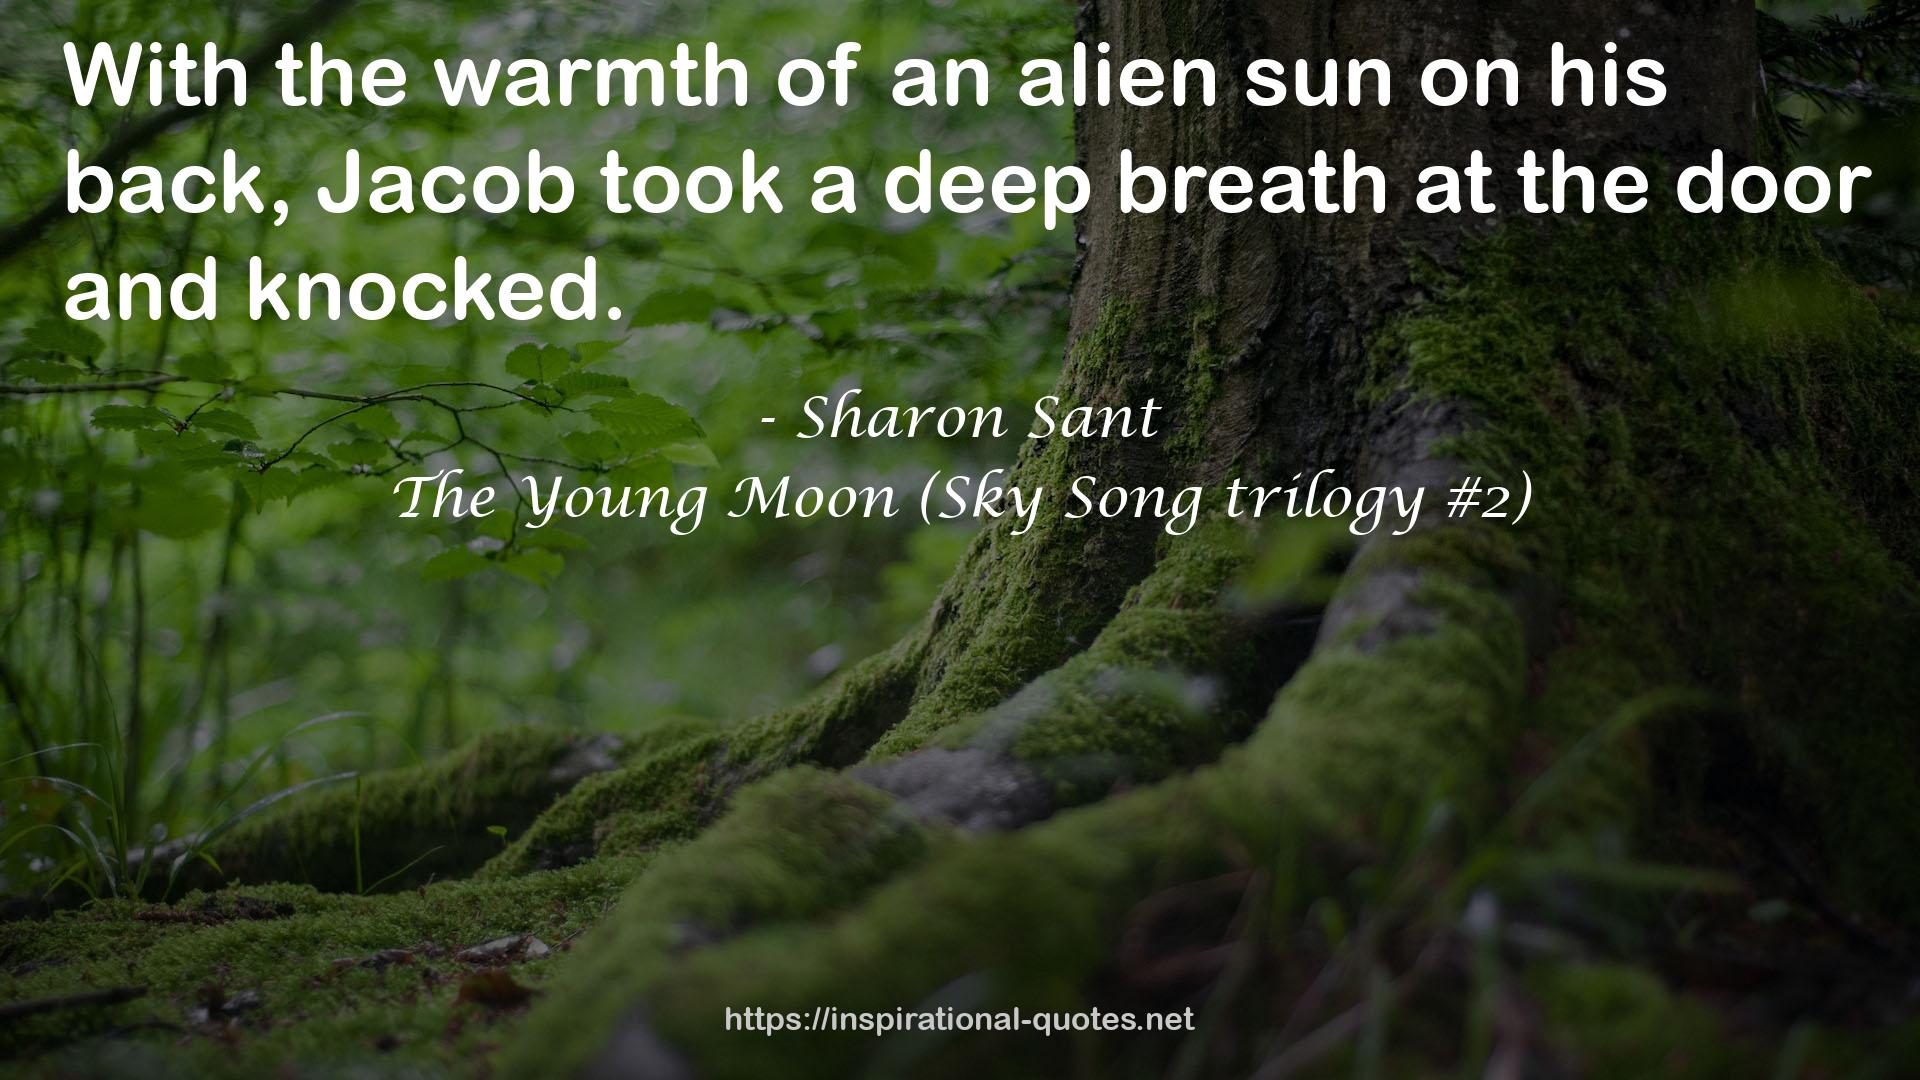 The Young Moon (Sky Song trilogy #2) QUOTES